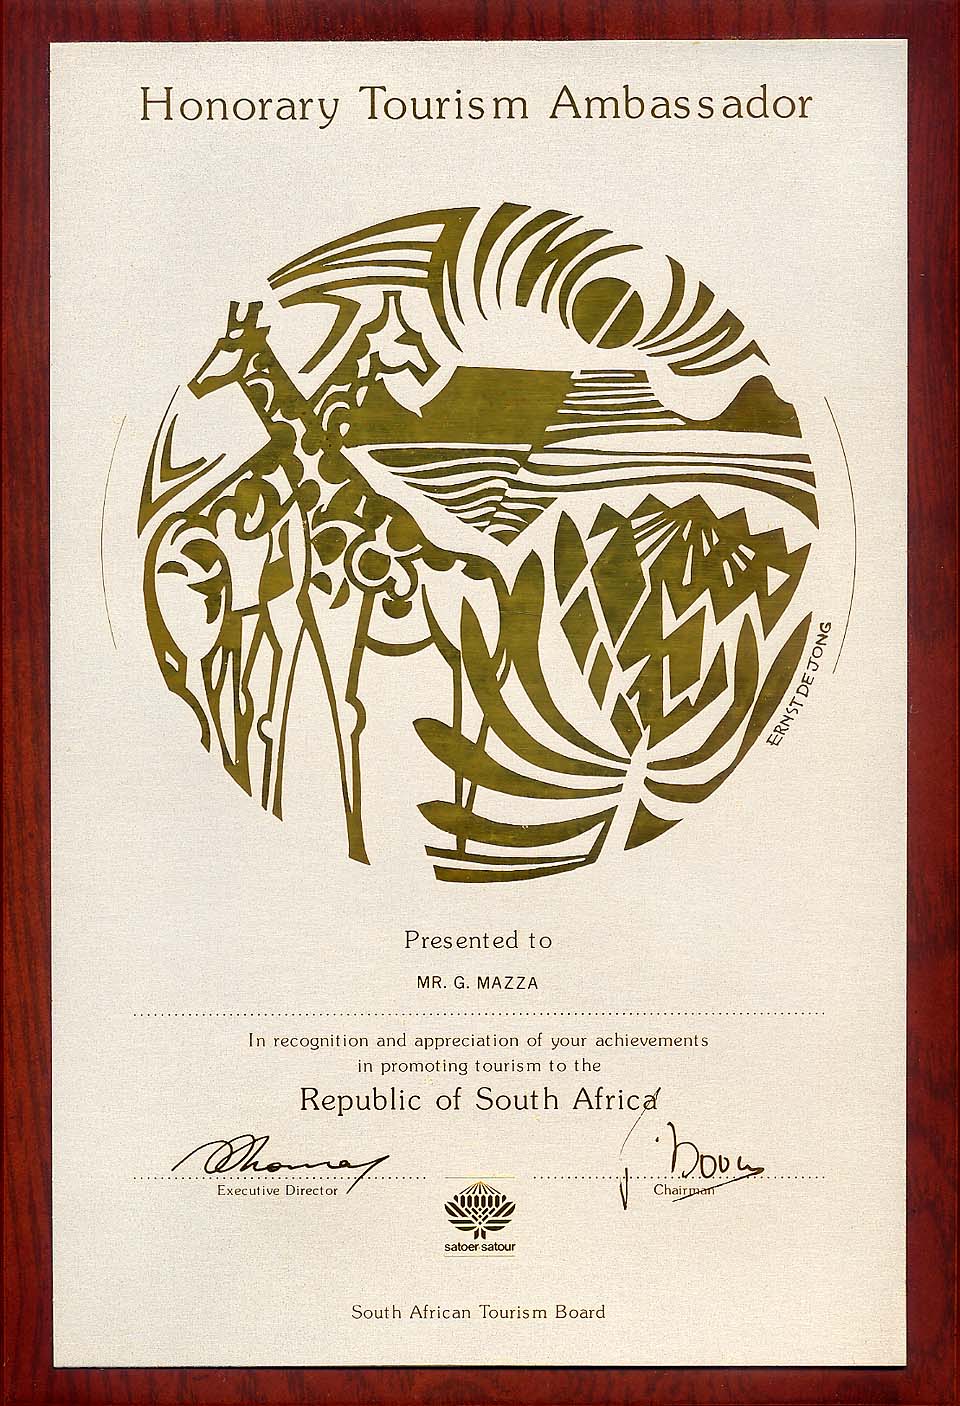 An award by South African Authorities